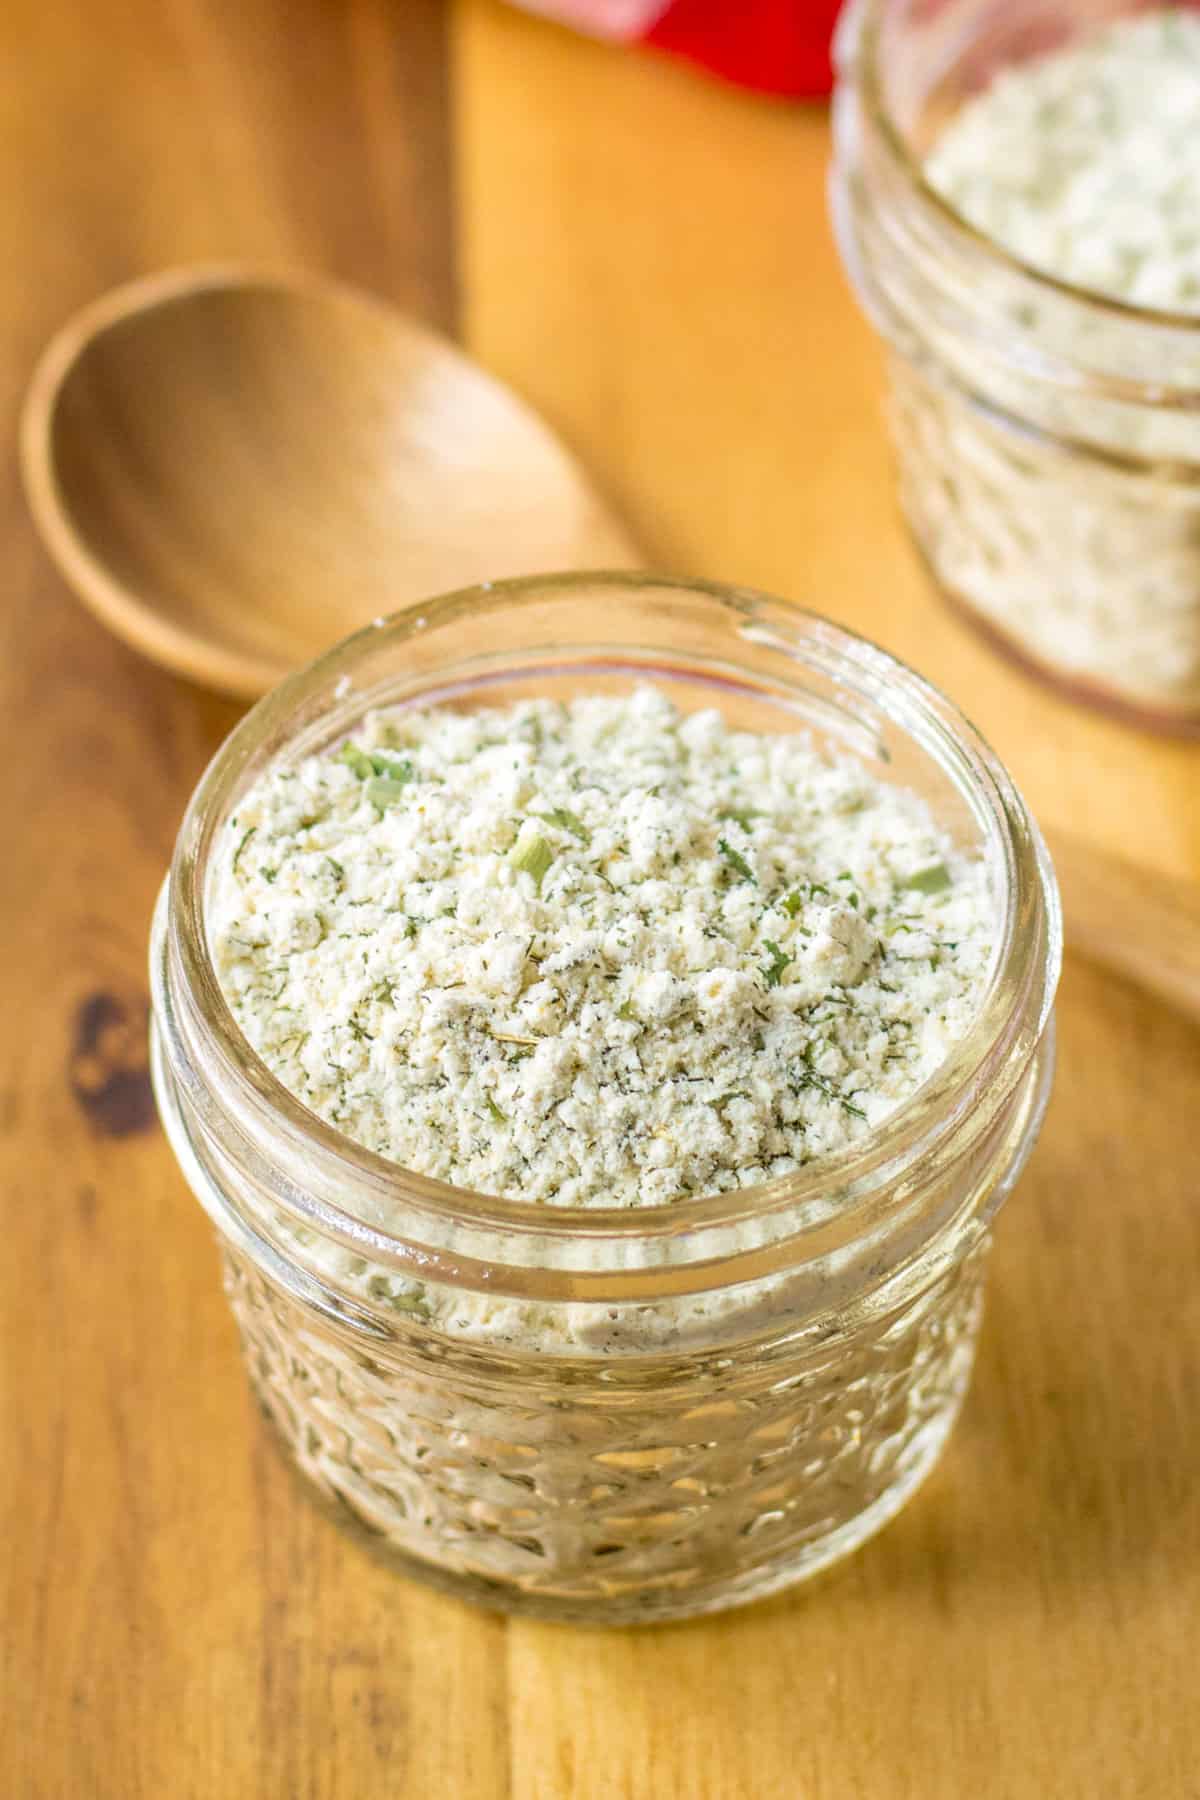 Homemade ranch seasoning mix in a glass jar with a wooden spoon next to it.